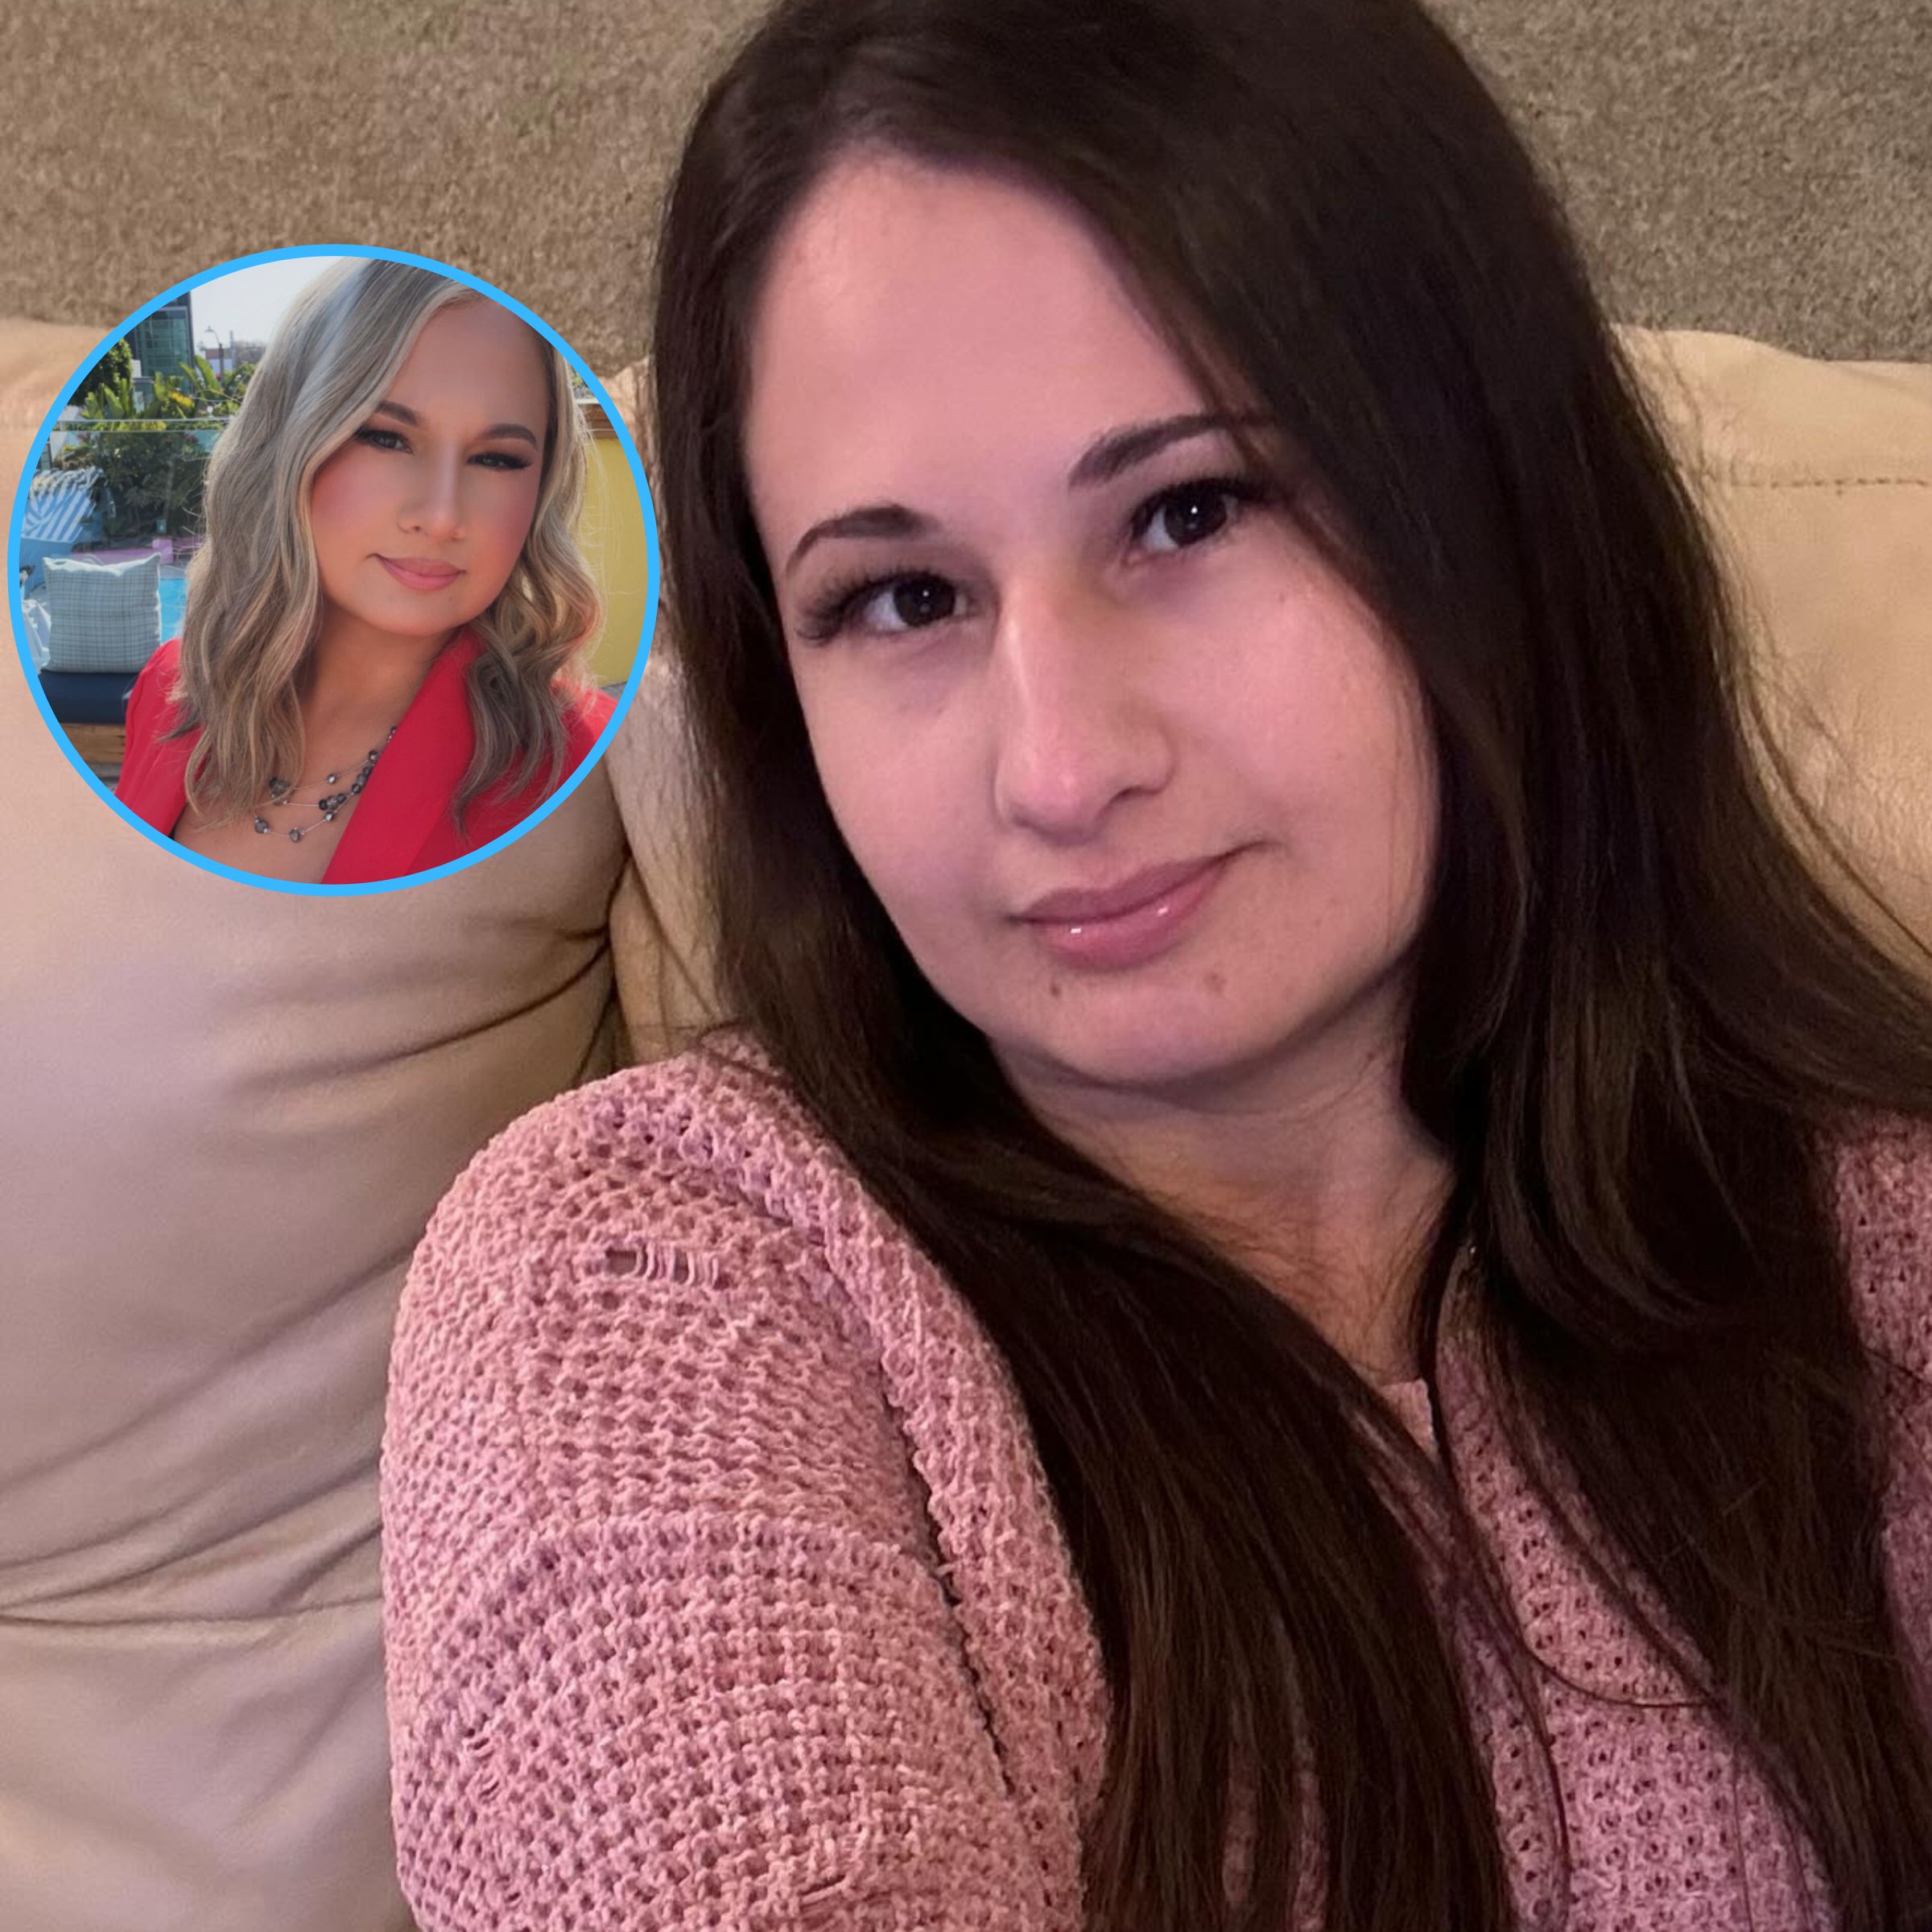 Gypsy Rose Blanchard Shows Off Nose Job in New TikTok Posts After Plastic Surgery